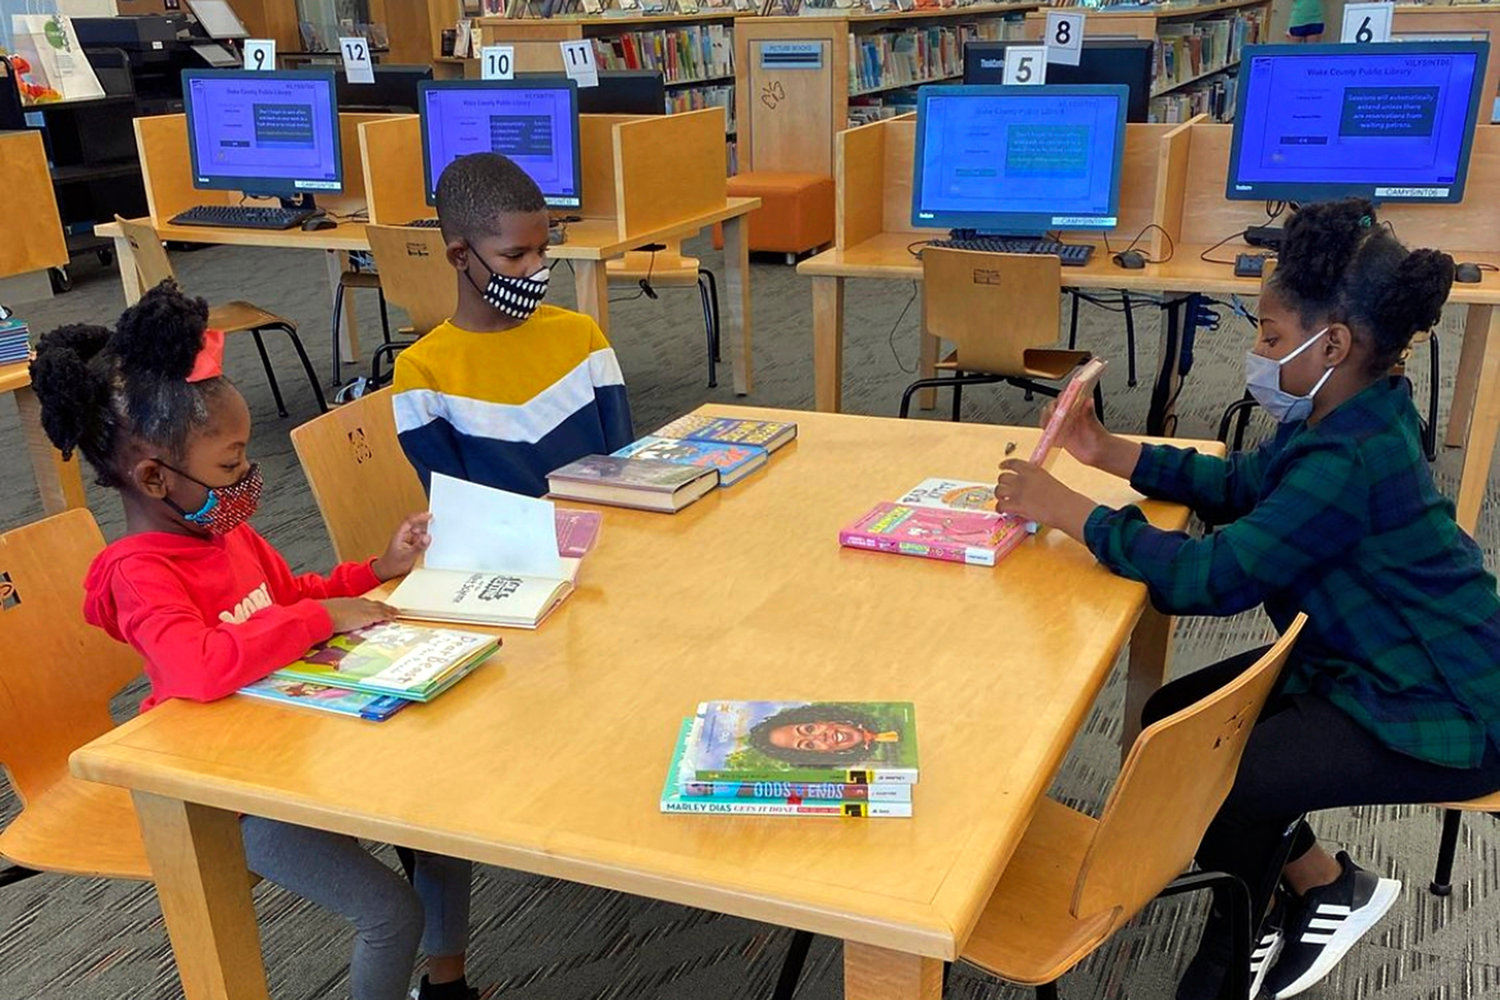 LESSON TIME — In this undated photo provided by Dalaine Bradley, Drew Waller, 7, Ahmad Waller, 11, and Zion Waller, 10, left to right, study at Cameron Village Library during homeschooling, in Raleigh, N.C.